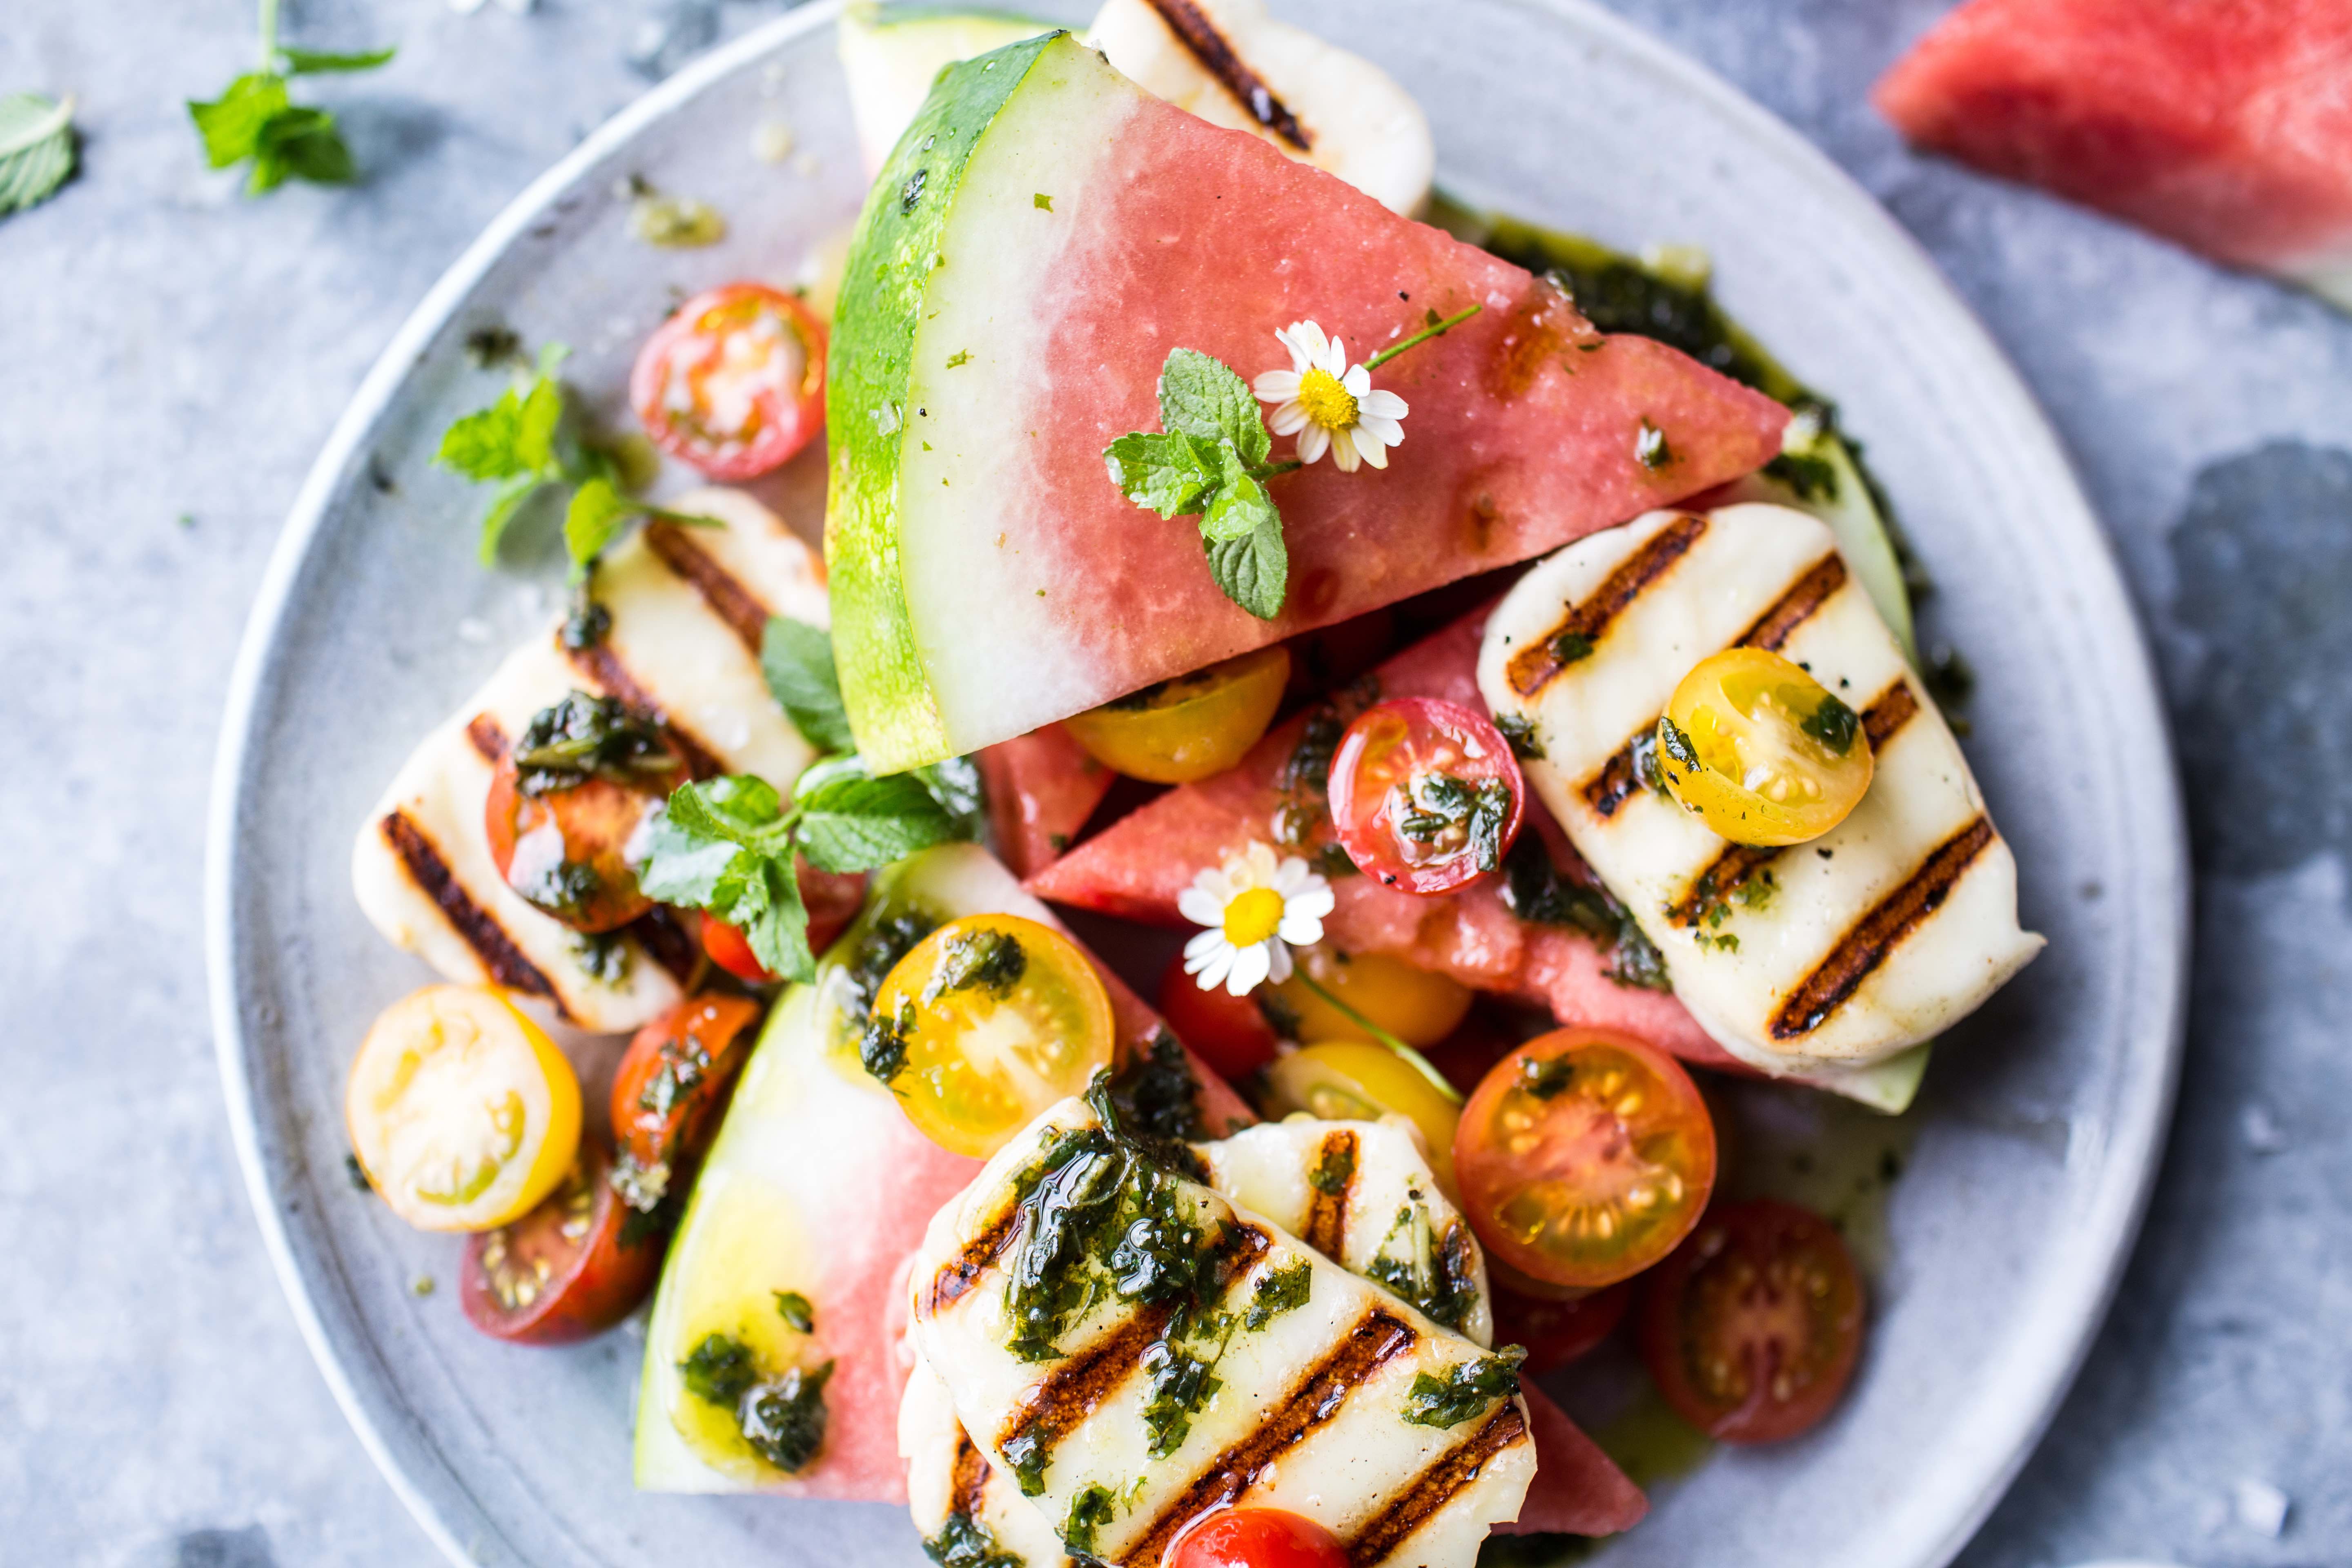 Grilled Halloumi and Watermelon Salad with Basil Oil